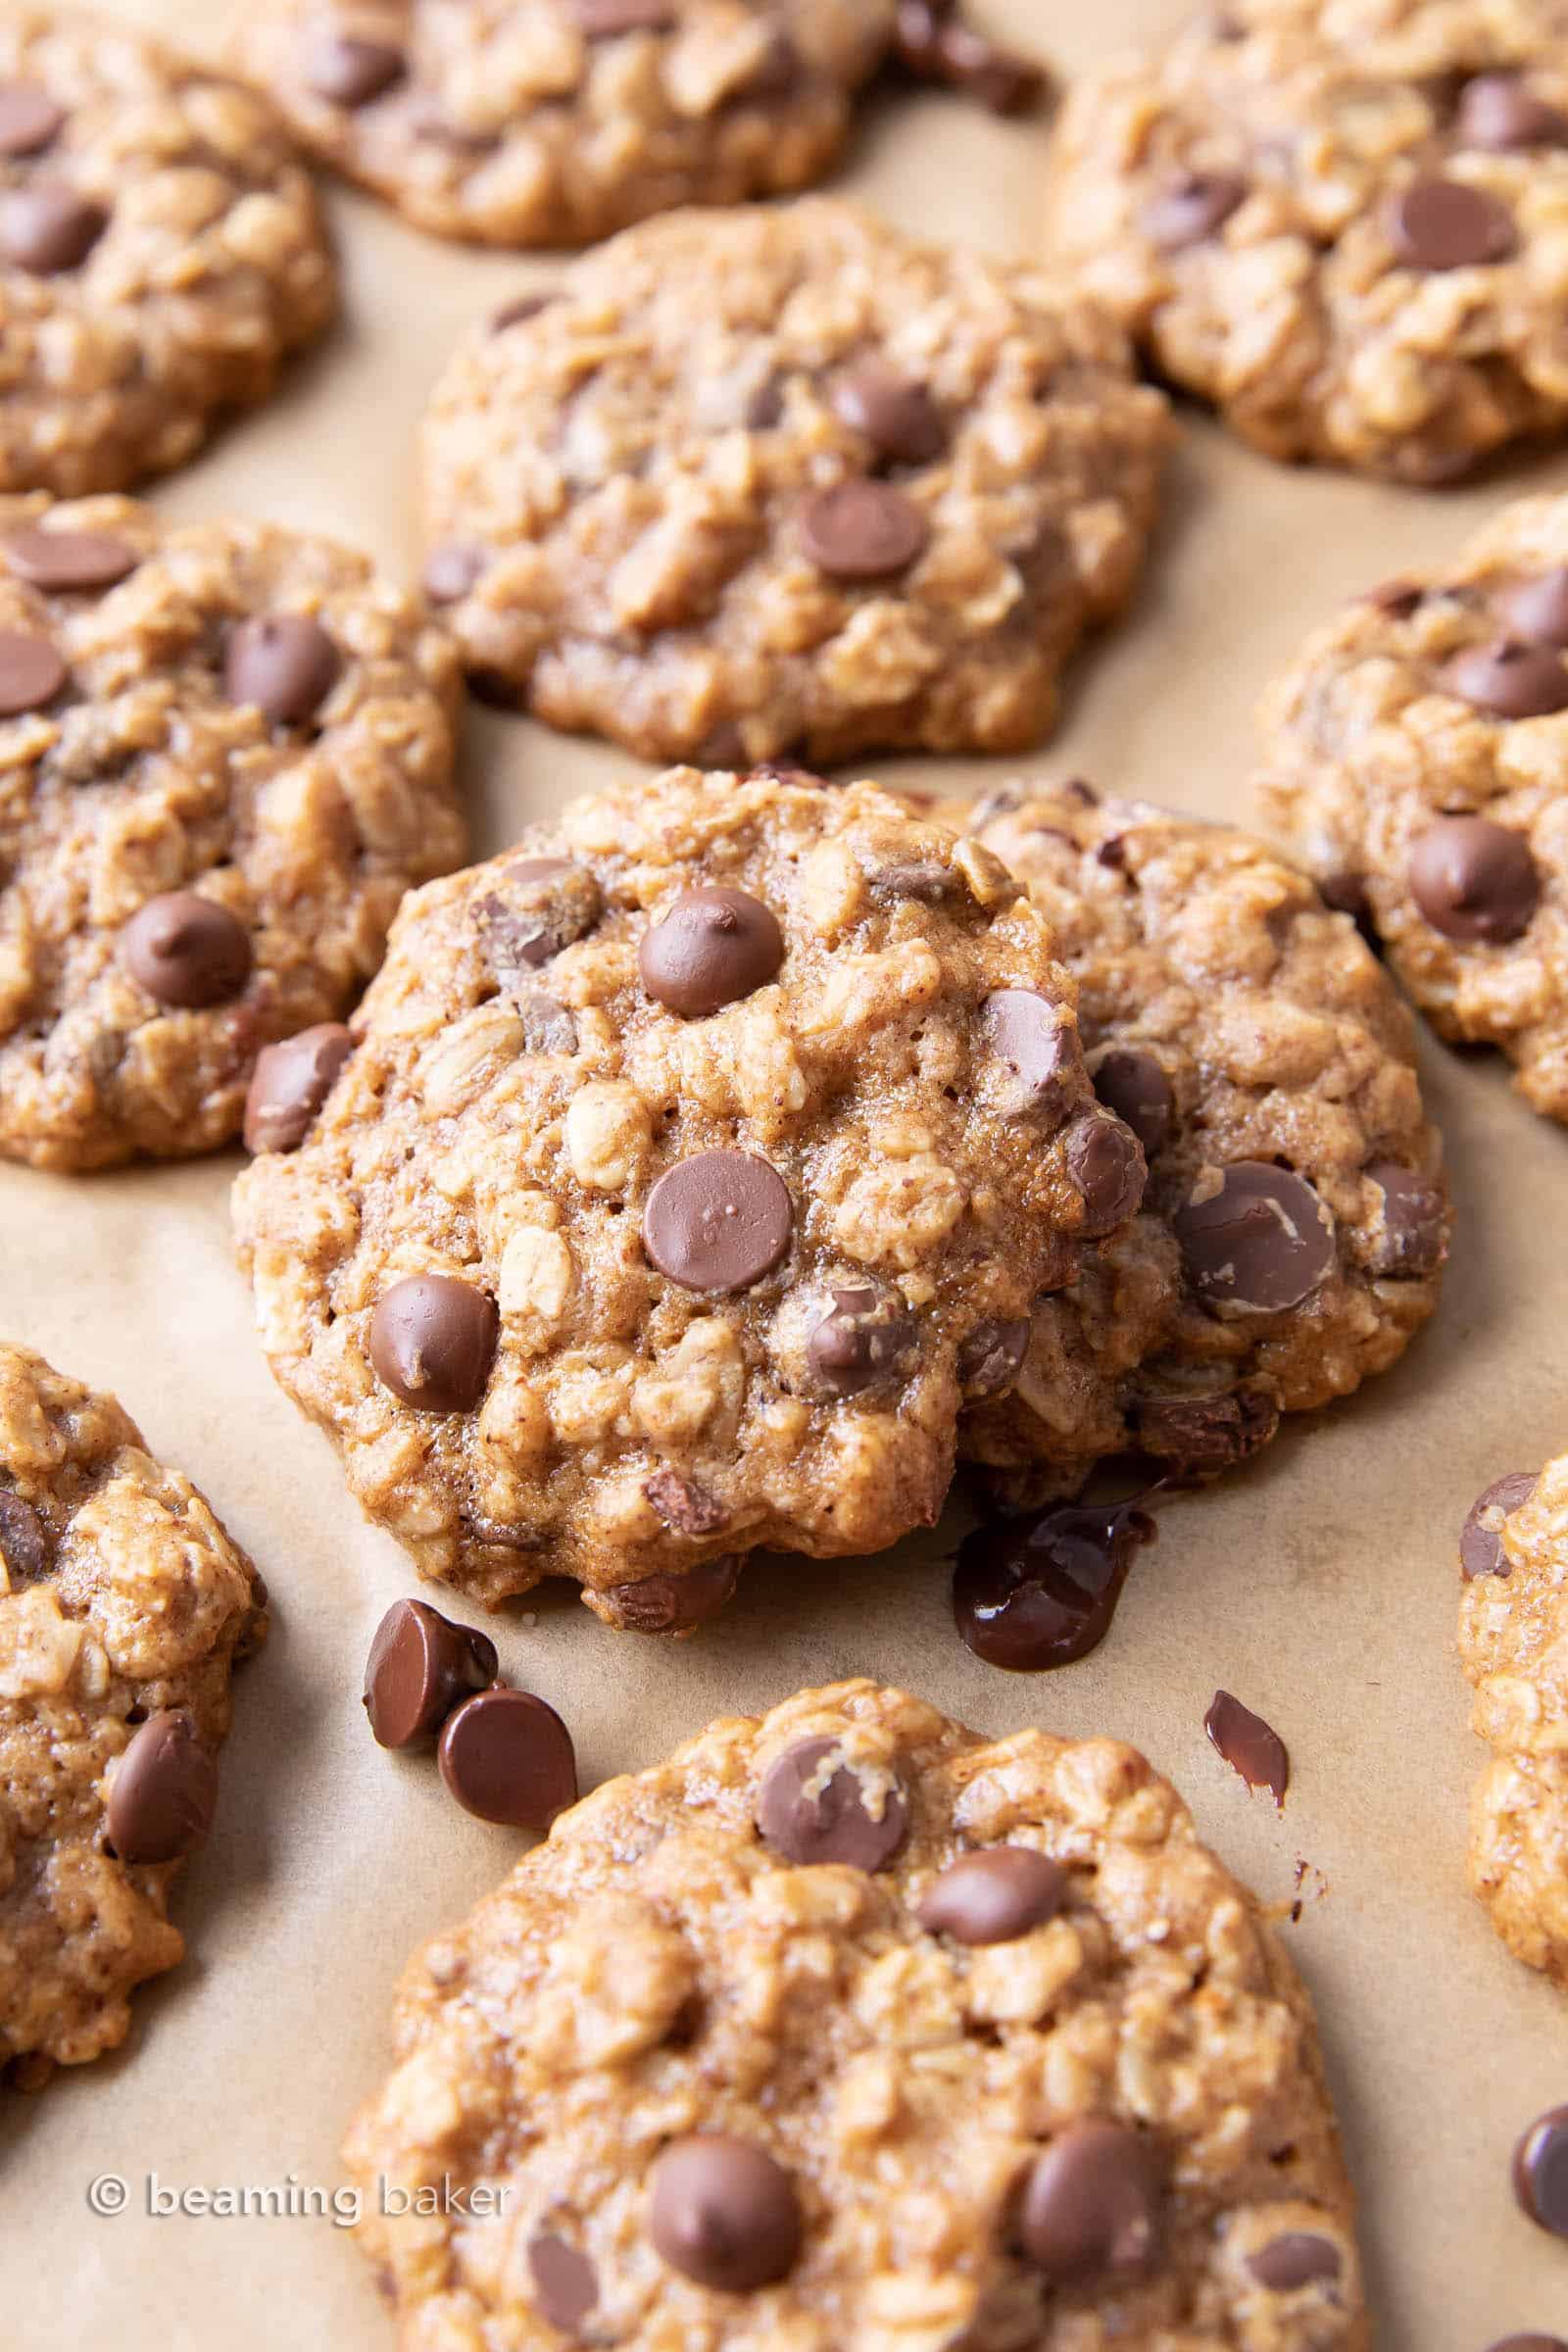 20+ Best Vegan Chocolate Chip Cookies: get ready to enjoy the best vegan chocolate chip cookie recipes! Including vegan oatmeal chocolate chip cookies, easy vegan chocolate chip cookies, vegan gluten free chocolate chip cookies and more! #vegancookies #chocolatechipcookies #veganchocolatechipcookies | Recipes on BeamingBaker.com